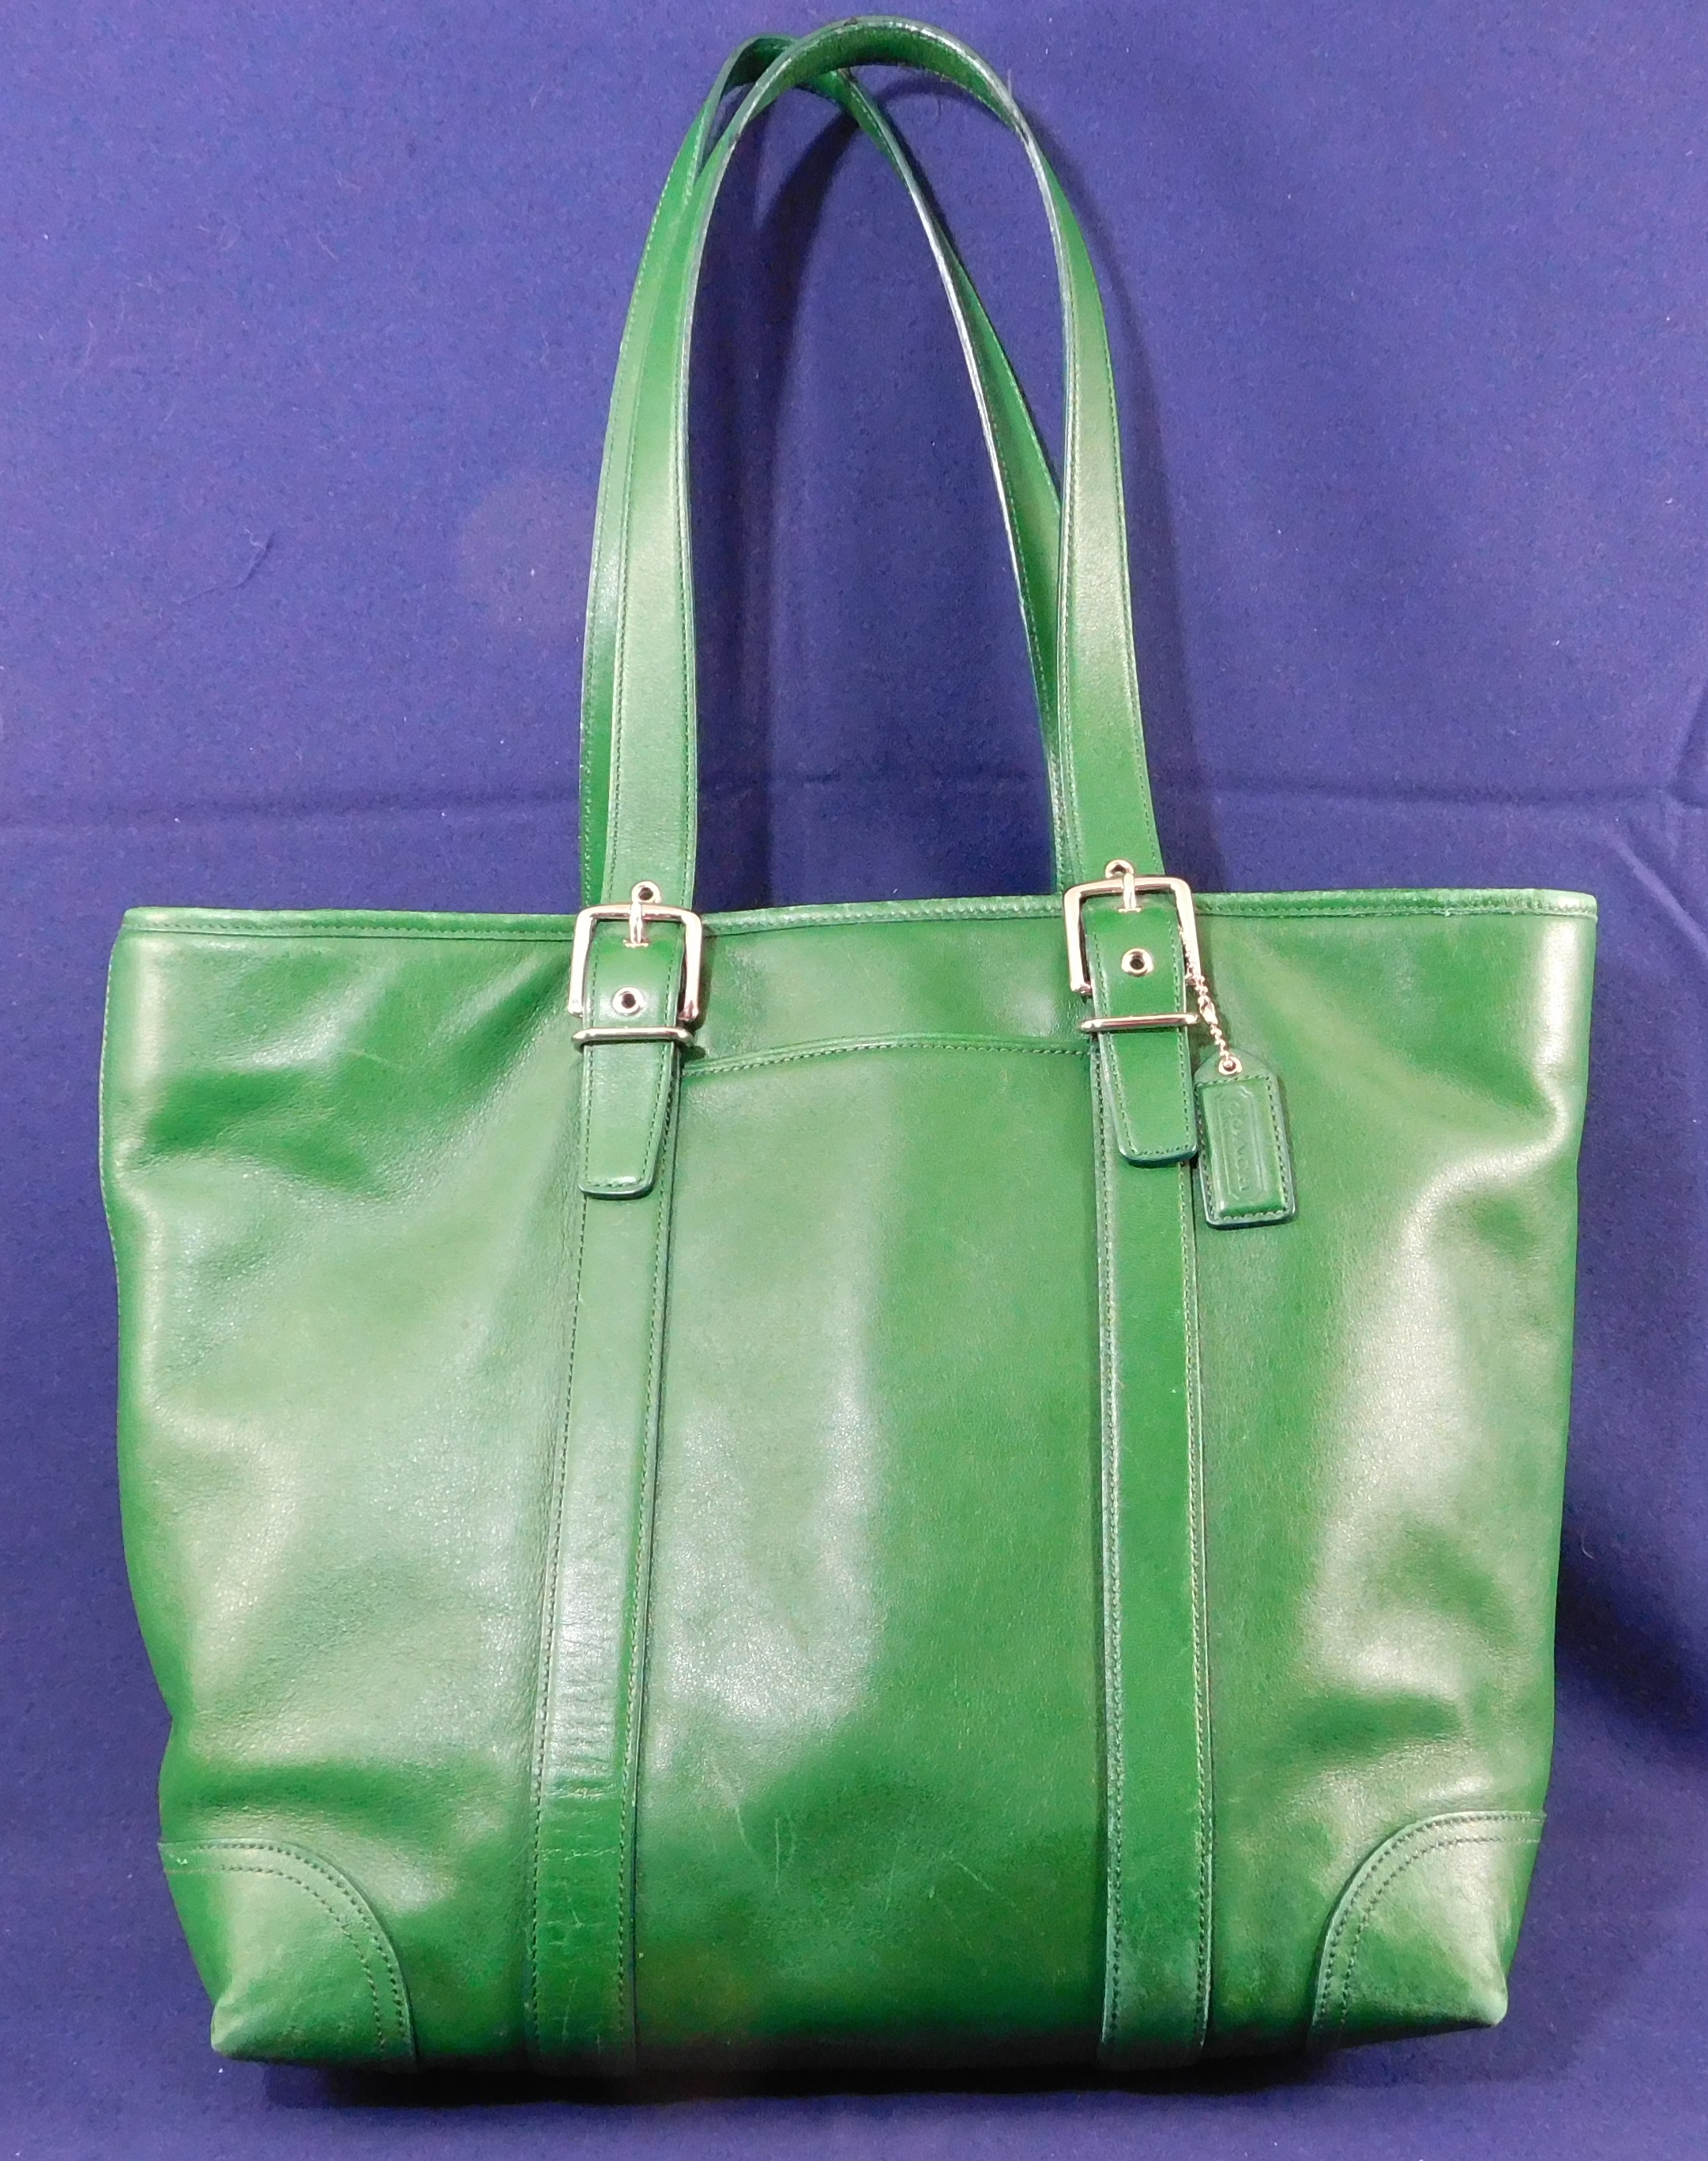 Dark Green Leather Handbags | Confederated Tribes of the Umatilla Indian Reservation